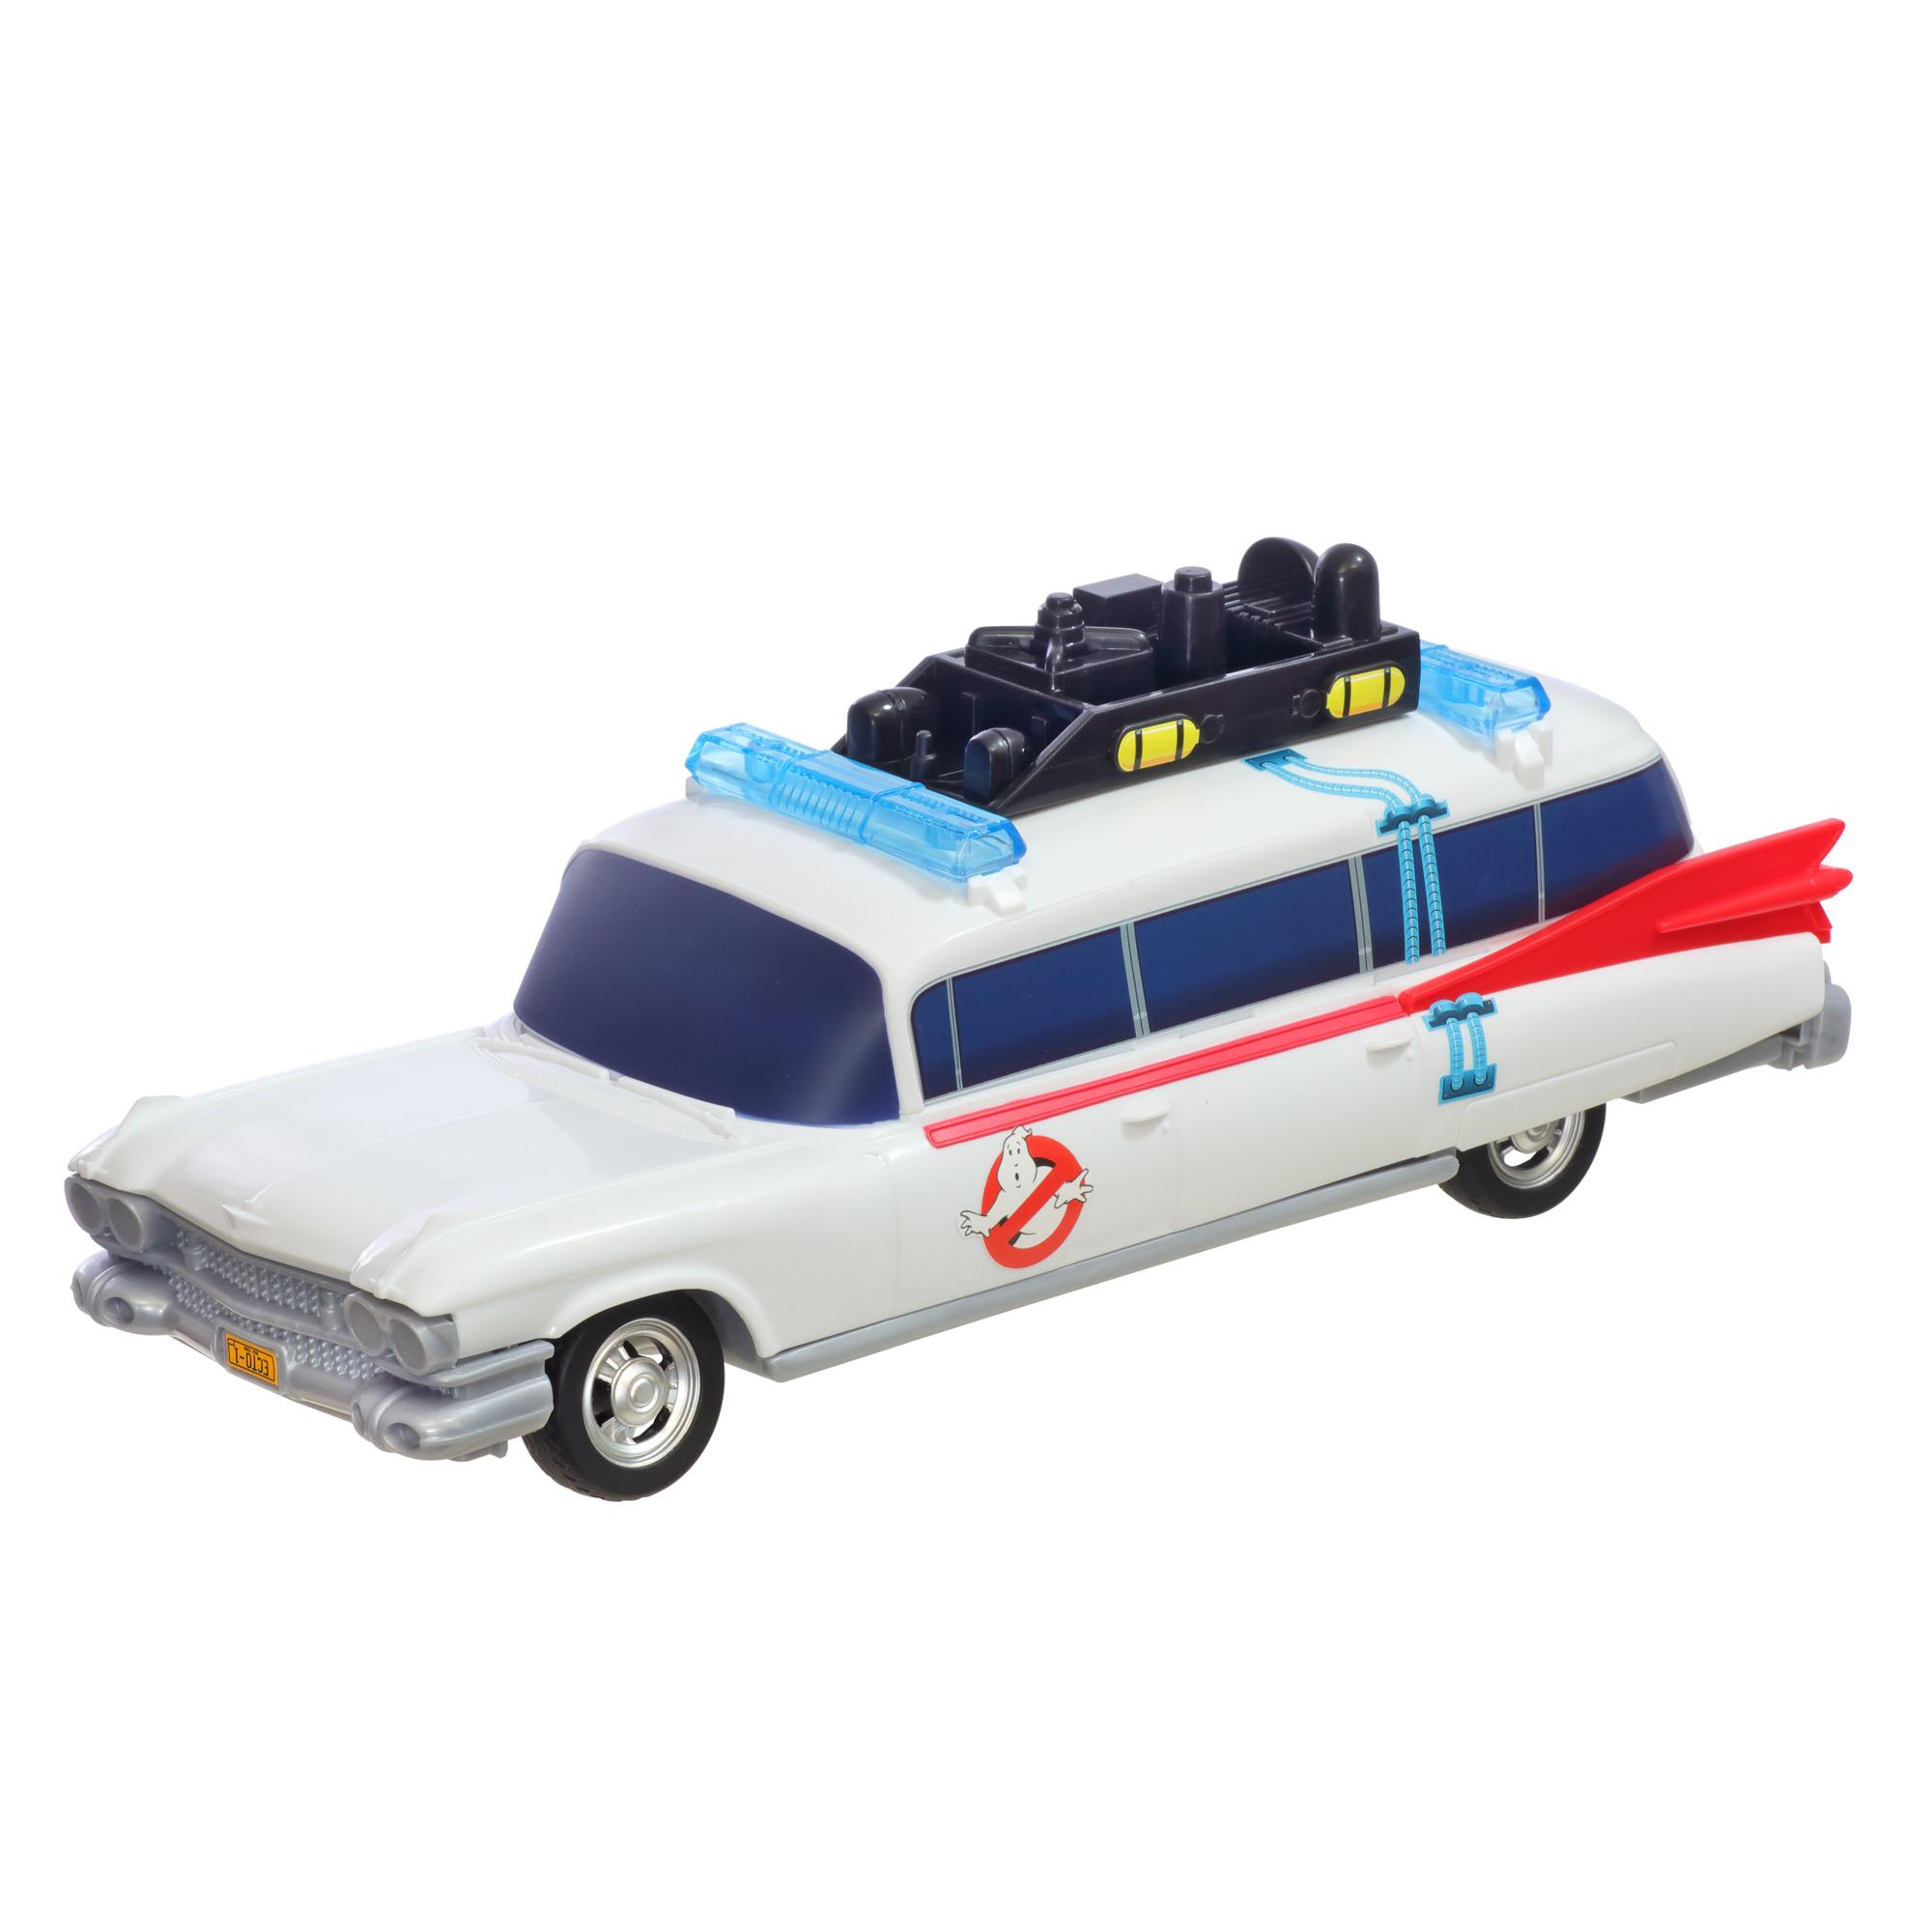 Ghostbusters Movie Ecto-1 Vehicle Toy for Kids Ages 4 and Up Classic Car for Kids, Collectors, and Fans